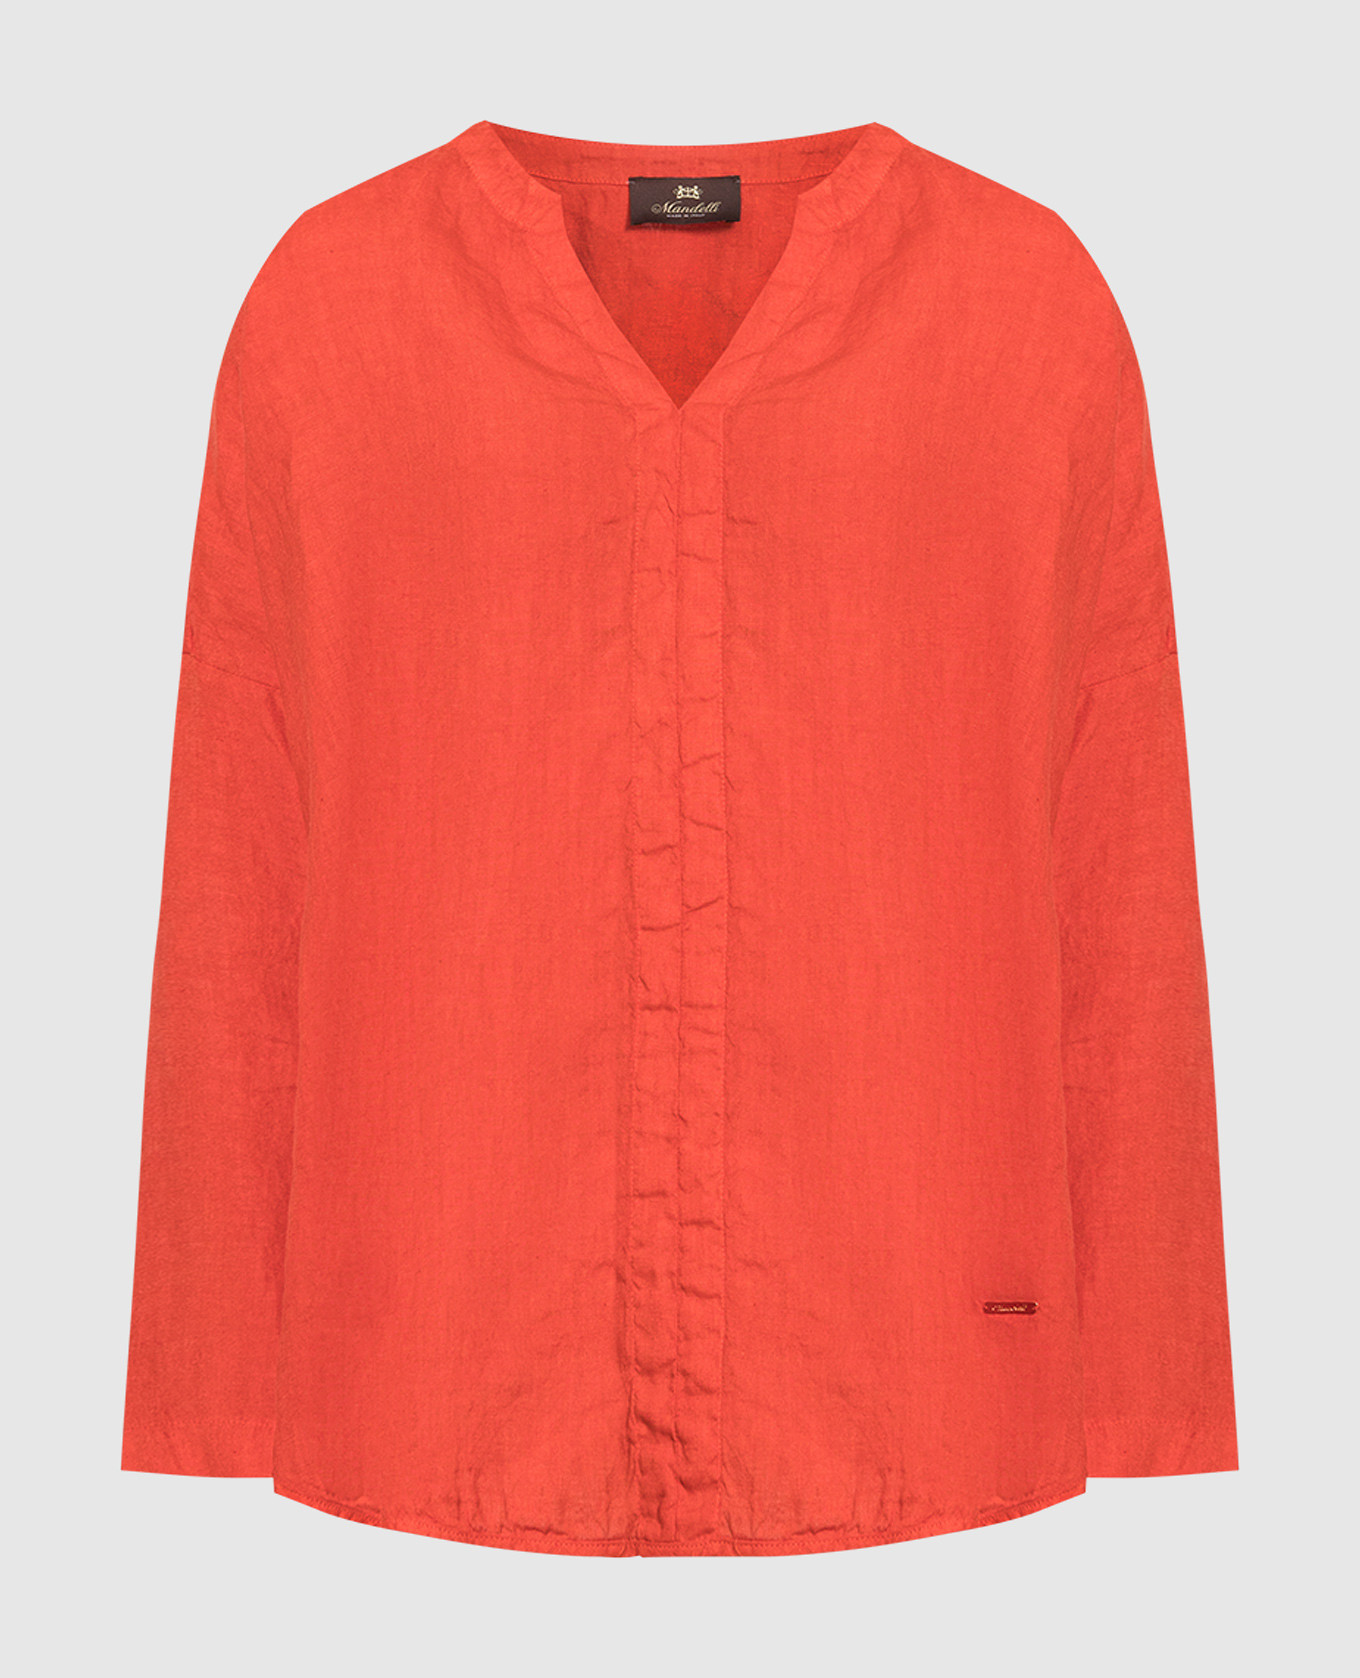 Red linen blouse with logo